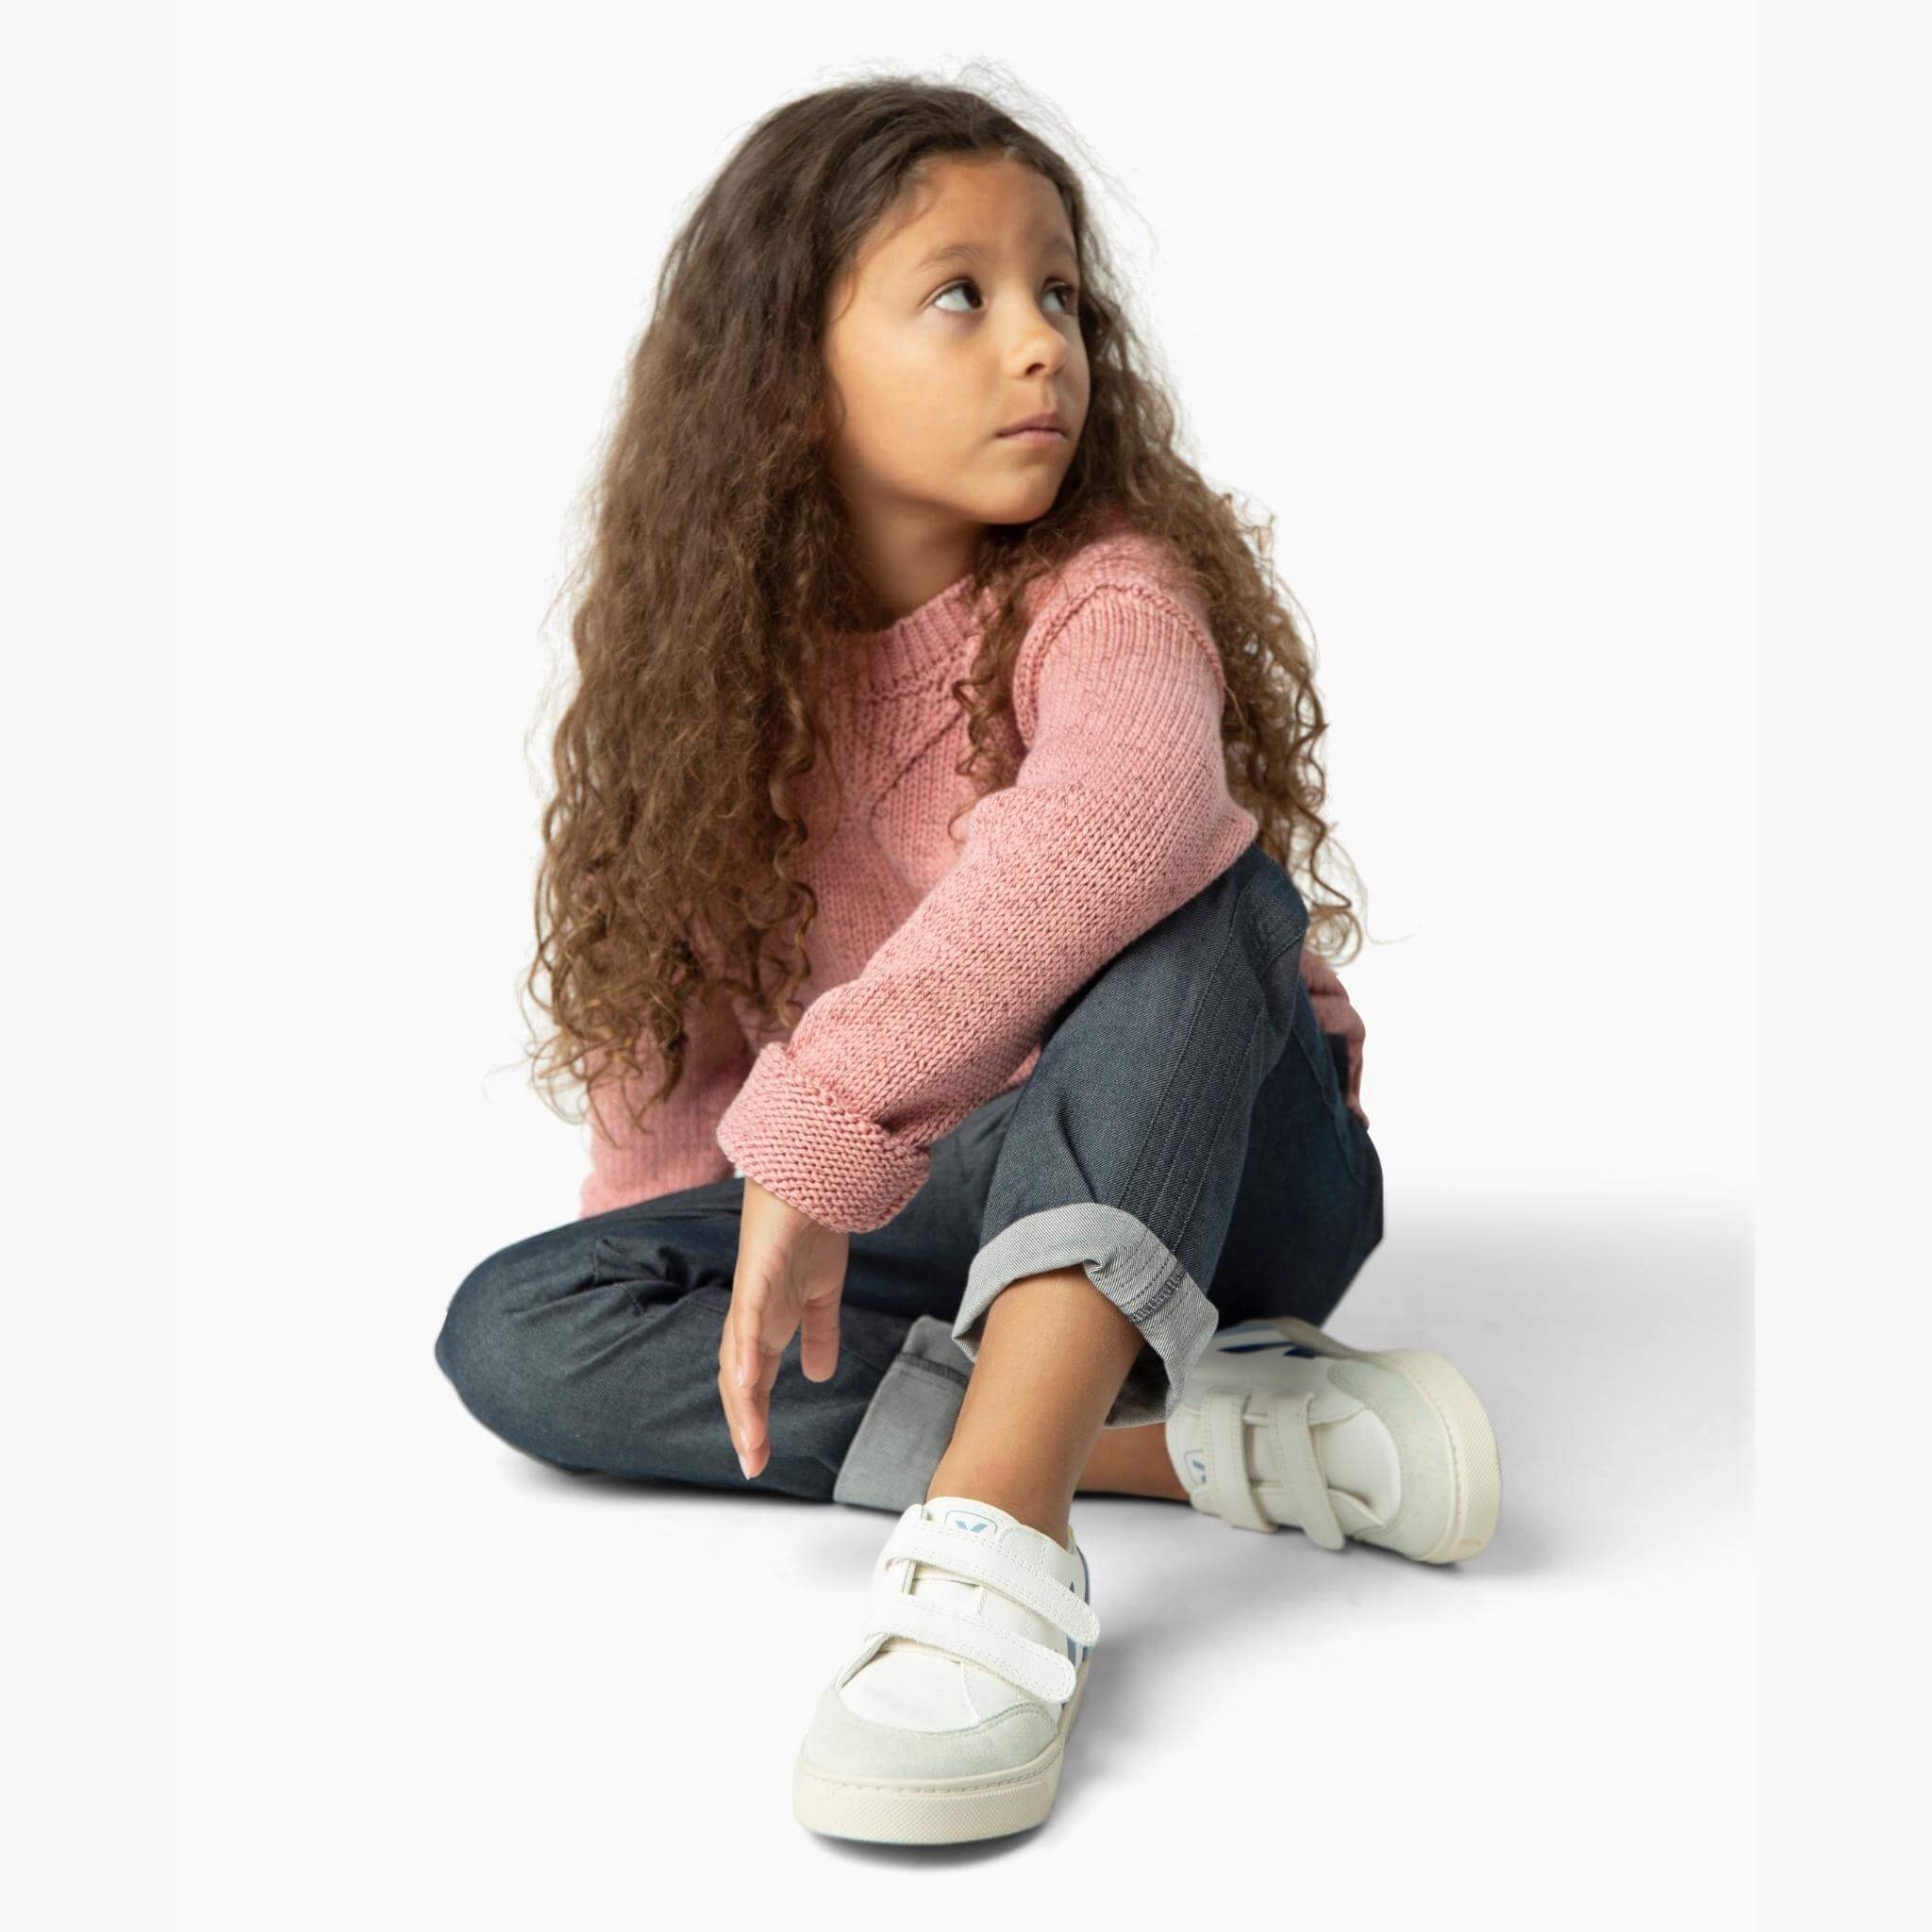 Girl wearing the perfect jean from our Kids Essentials collection. Soft Denim Pants in Dark Gray, cuffed for a polished yet hip look, made of 100% organic Japanese cotton